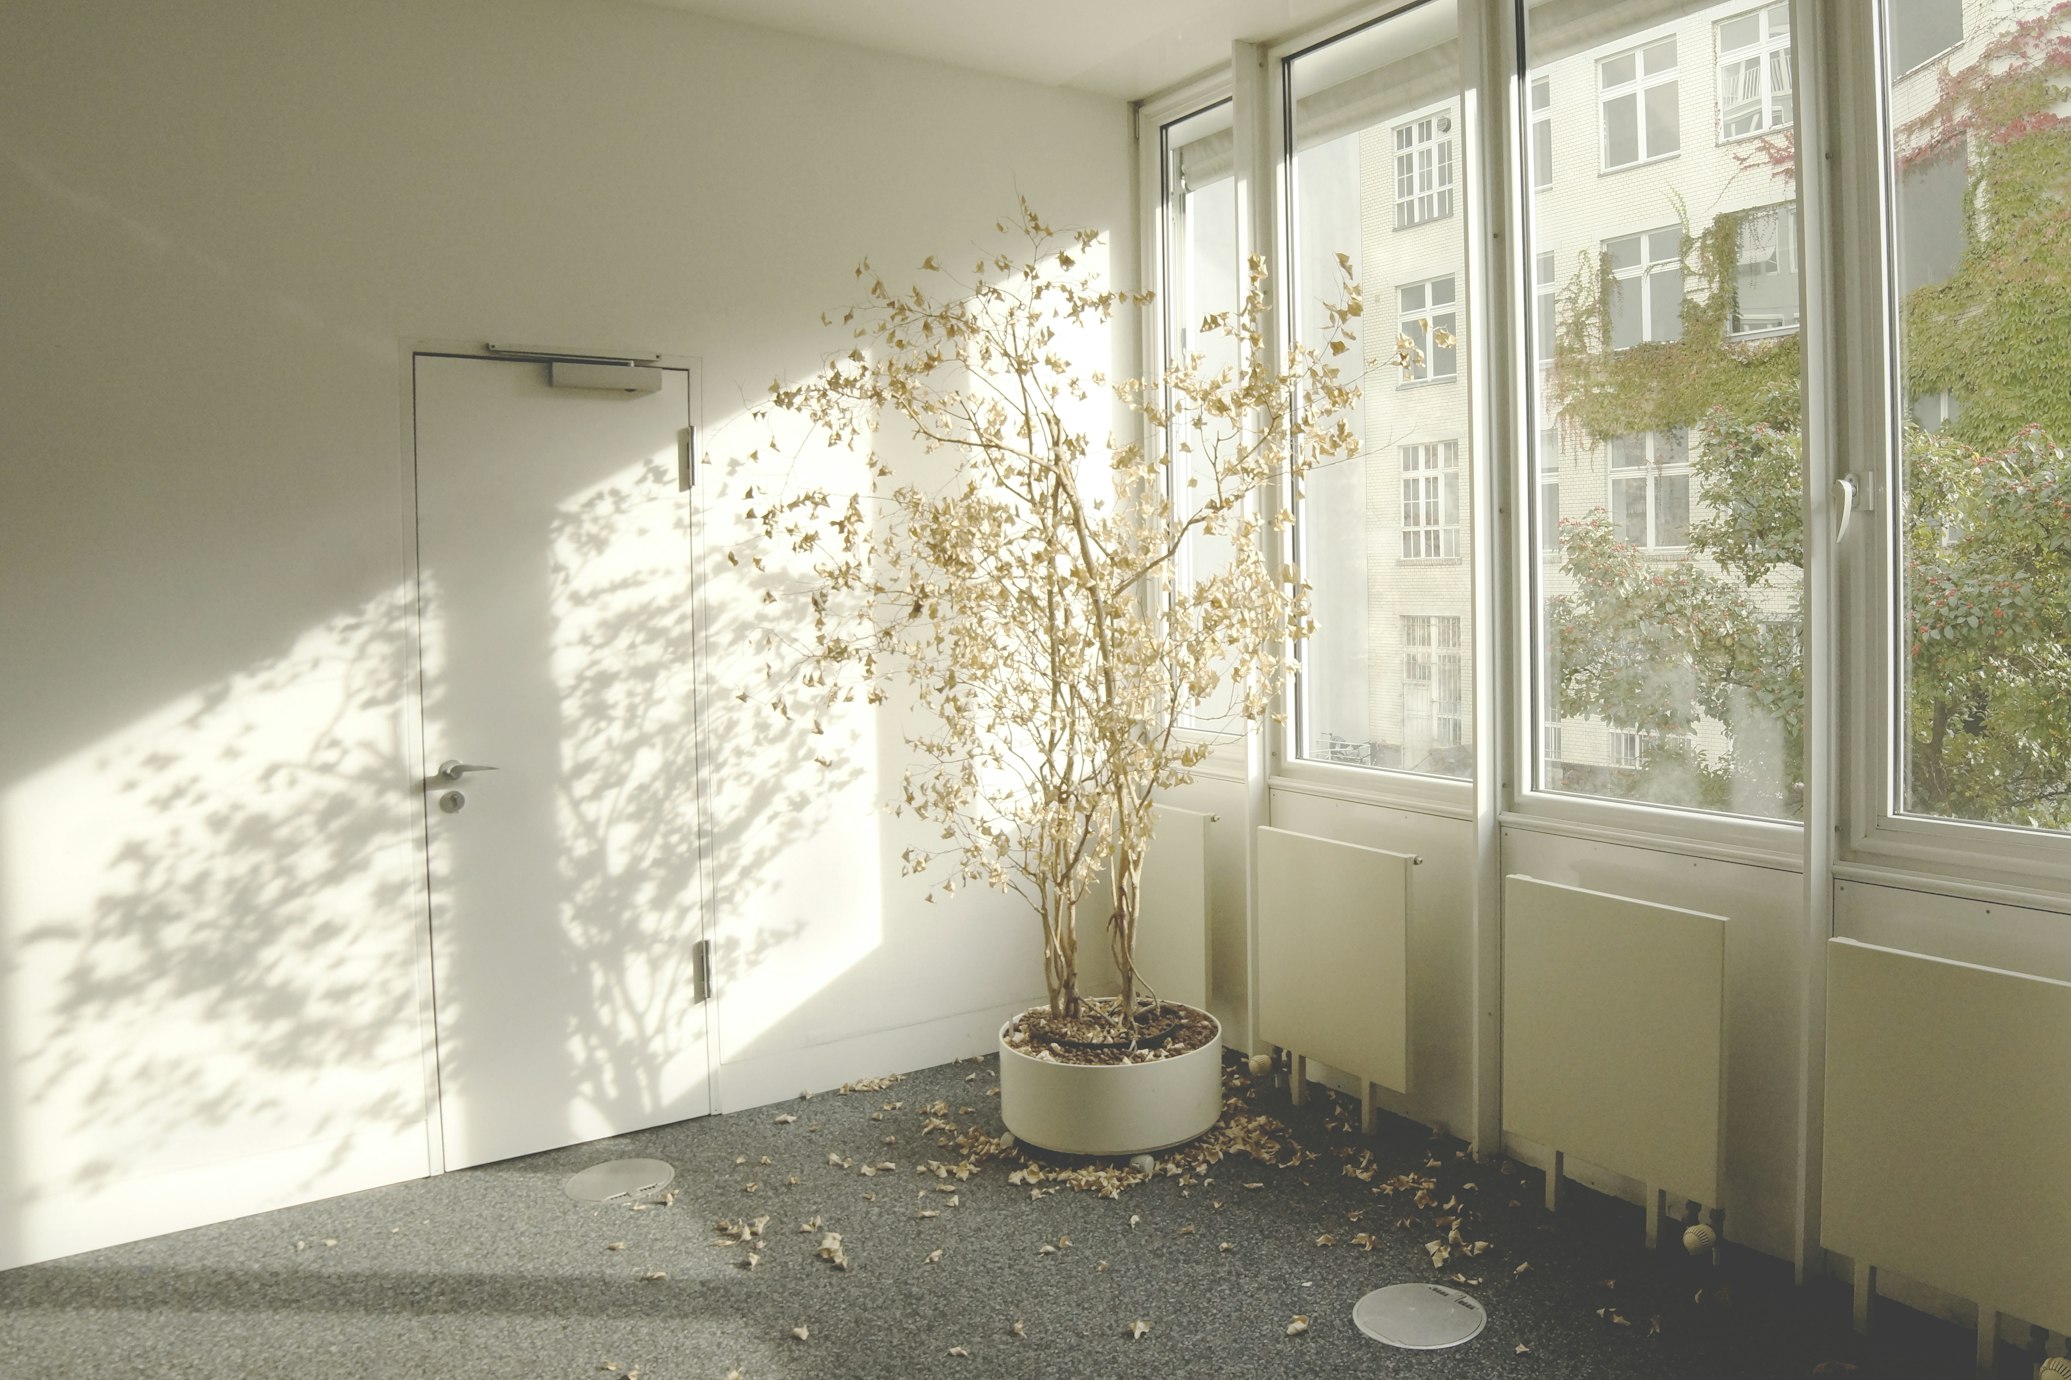 a tree sheds its leaves inside a white room. Outside the window another tree is flourishing